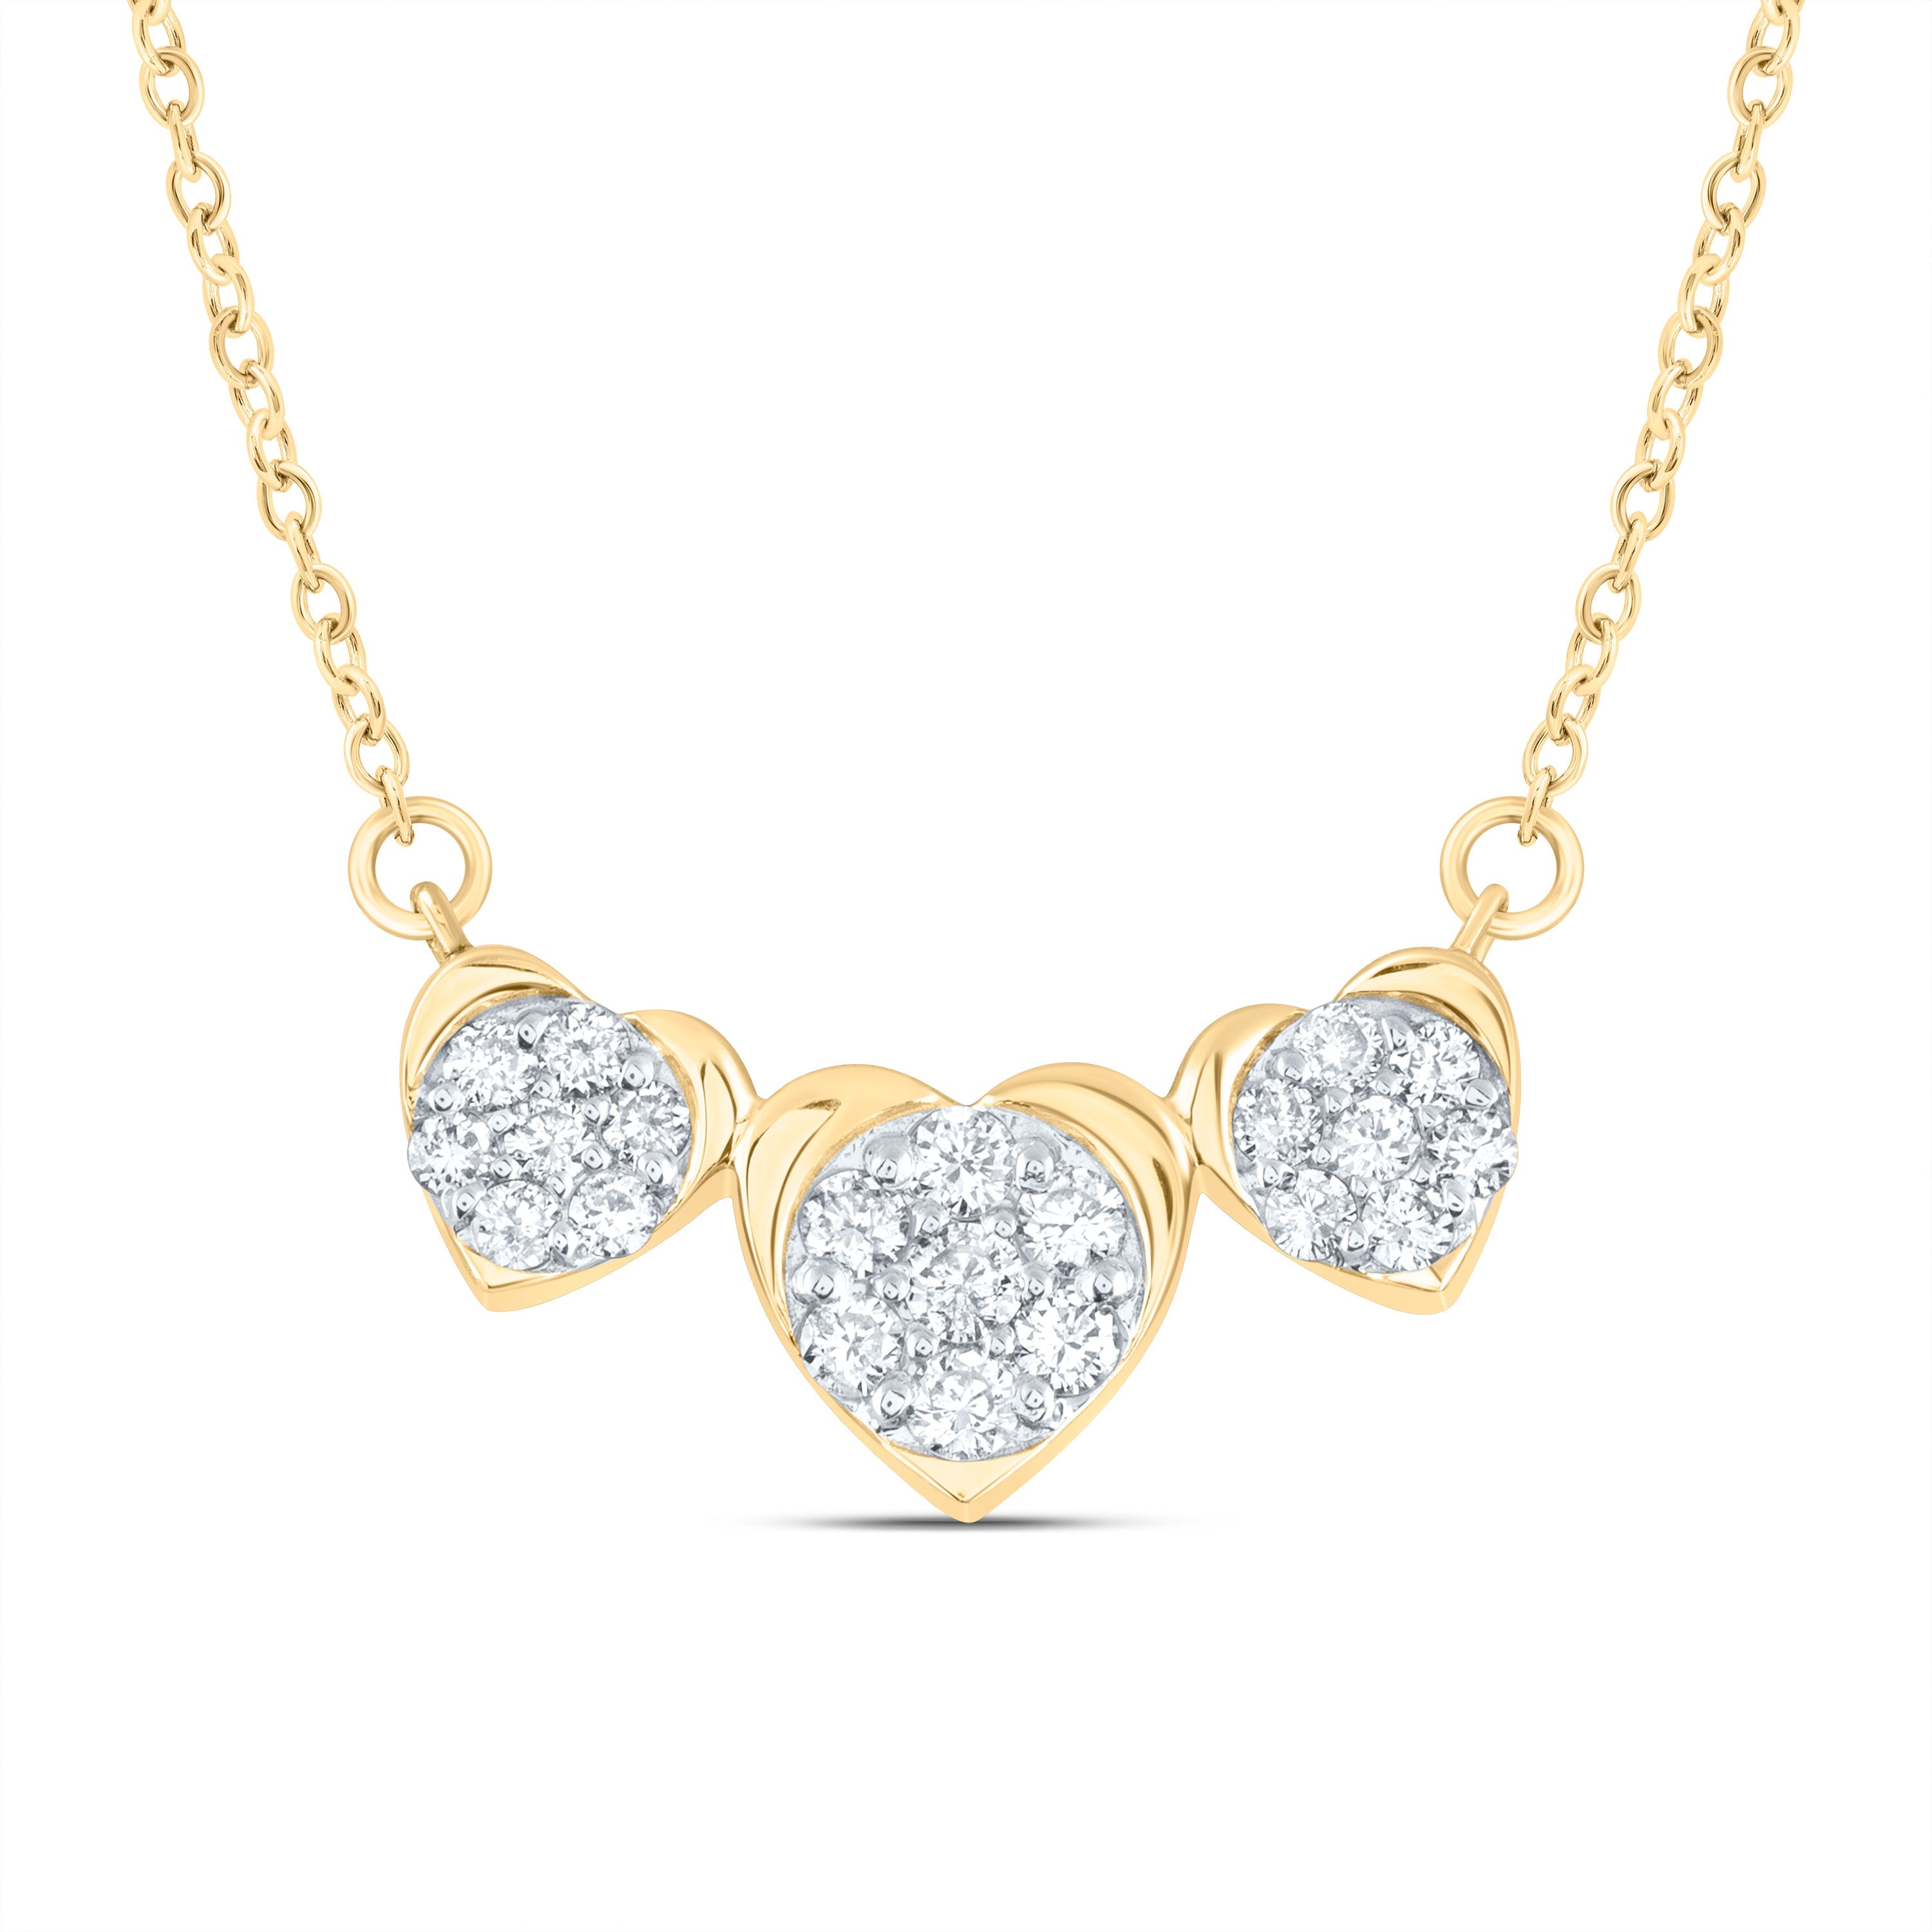 10kt Yellow Gold Womens Round Diamond Triple Heart Necklace 1/4 Cttw